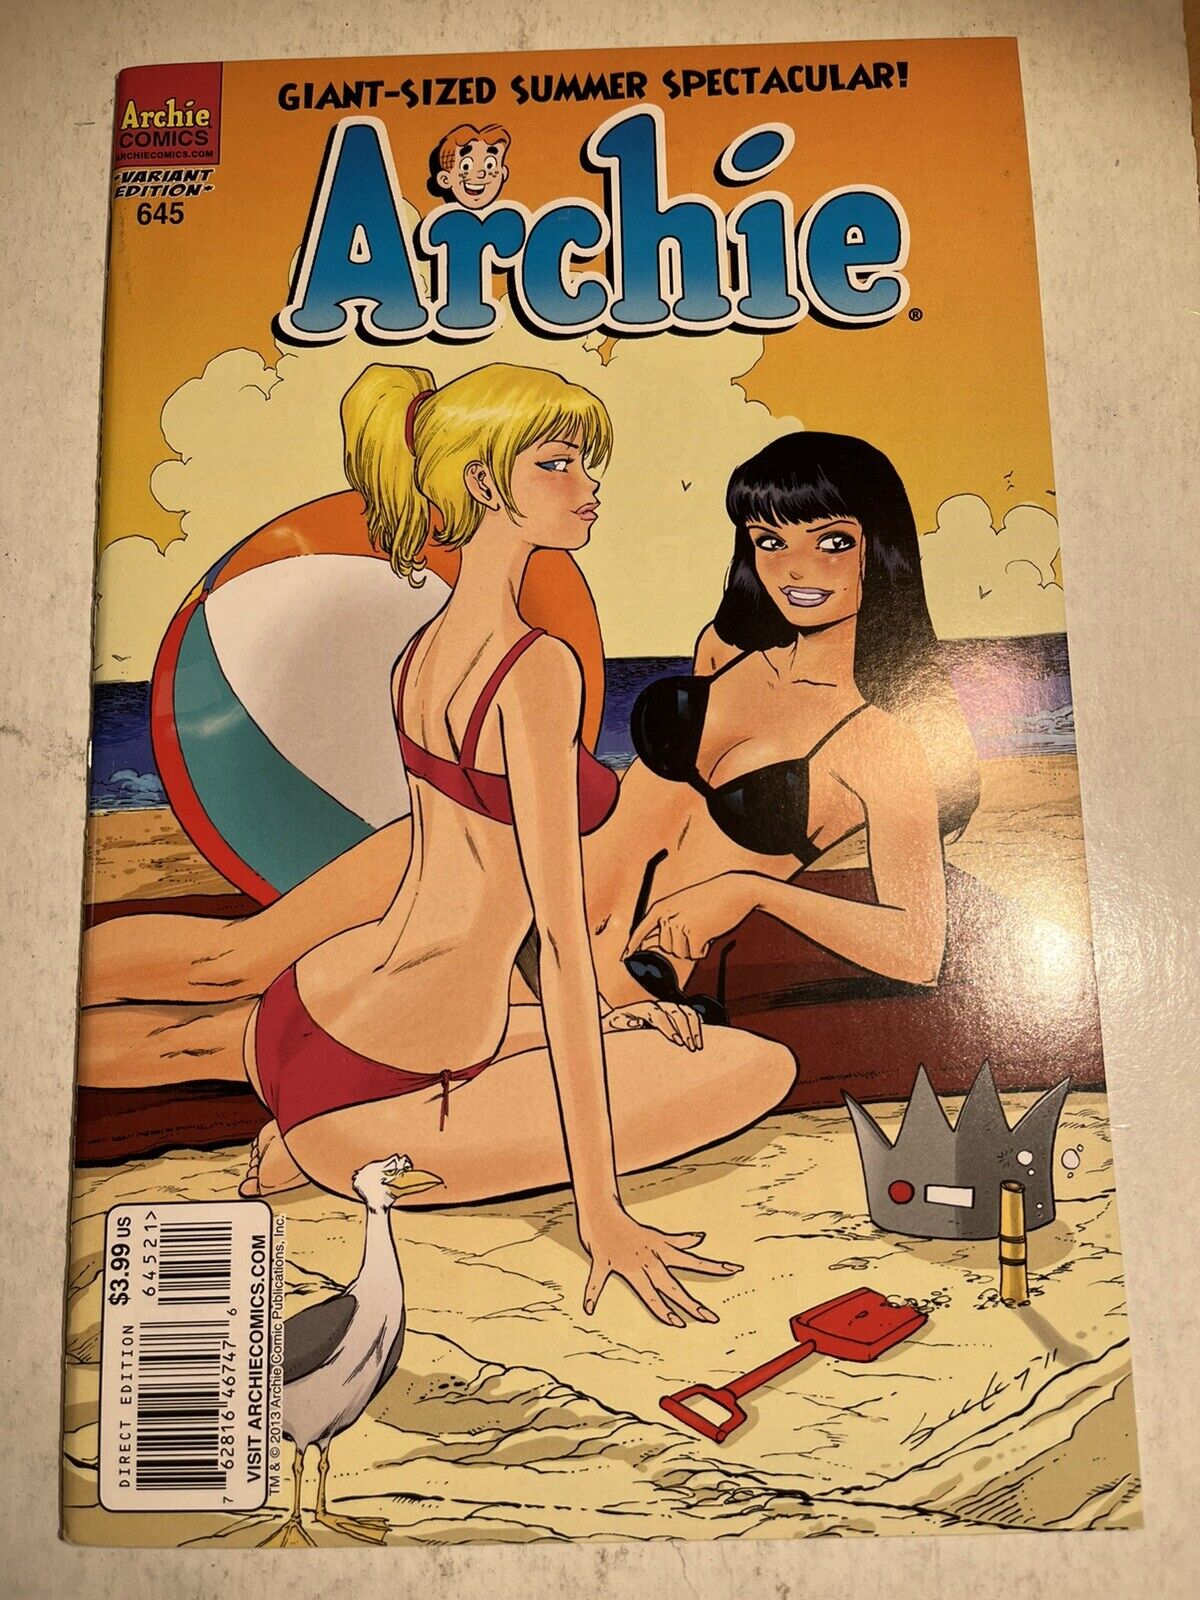 Archie (2013) #645 - Tim Seely Variant - Archie Publications 